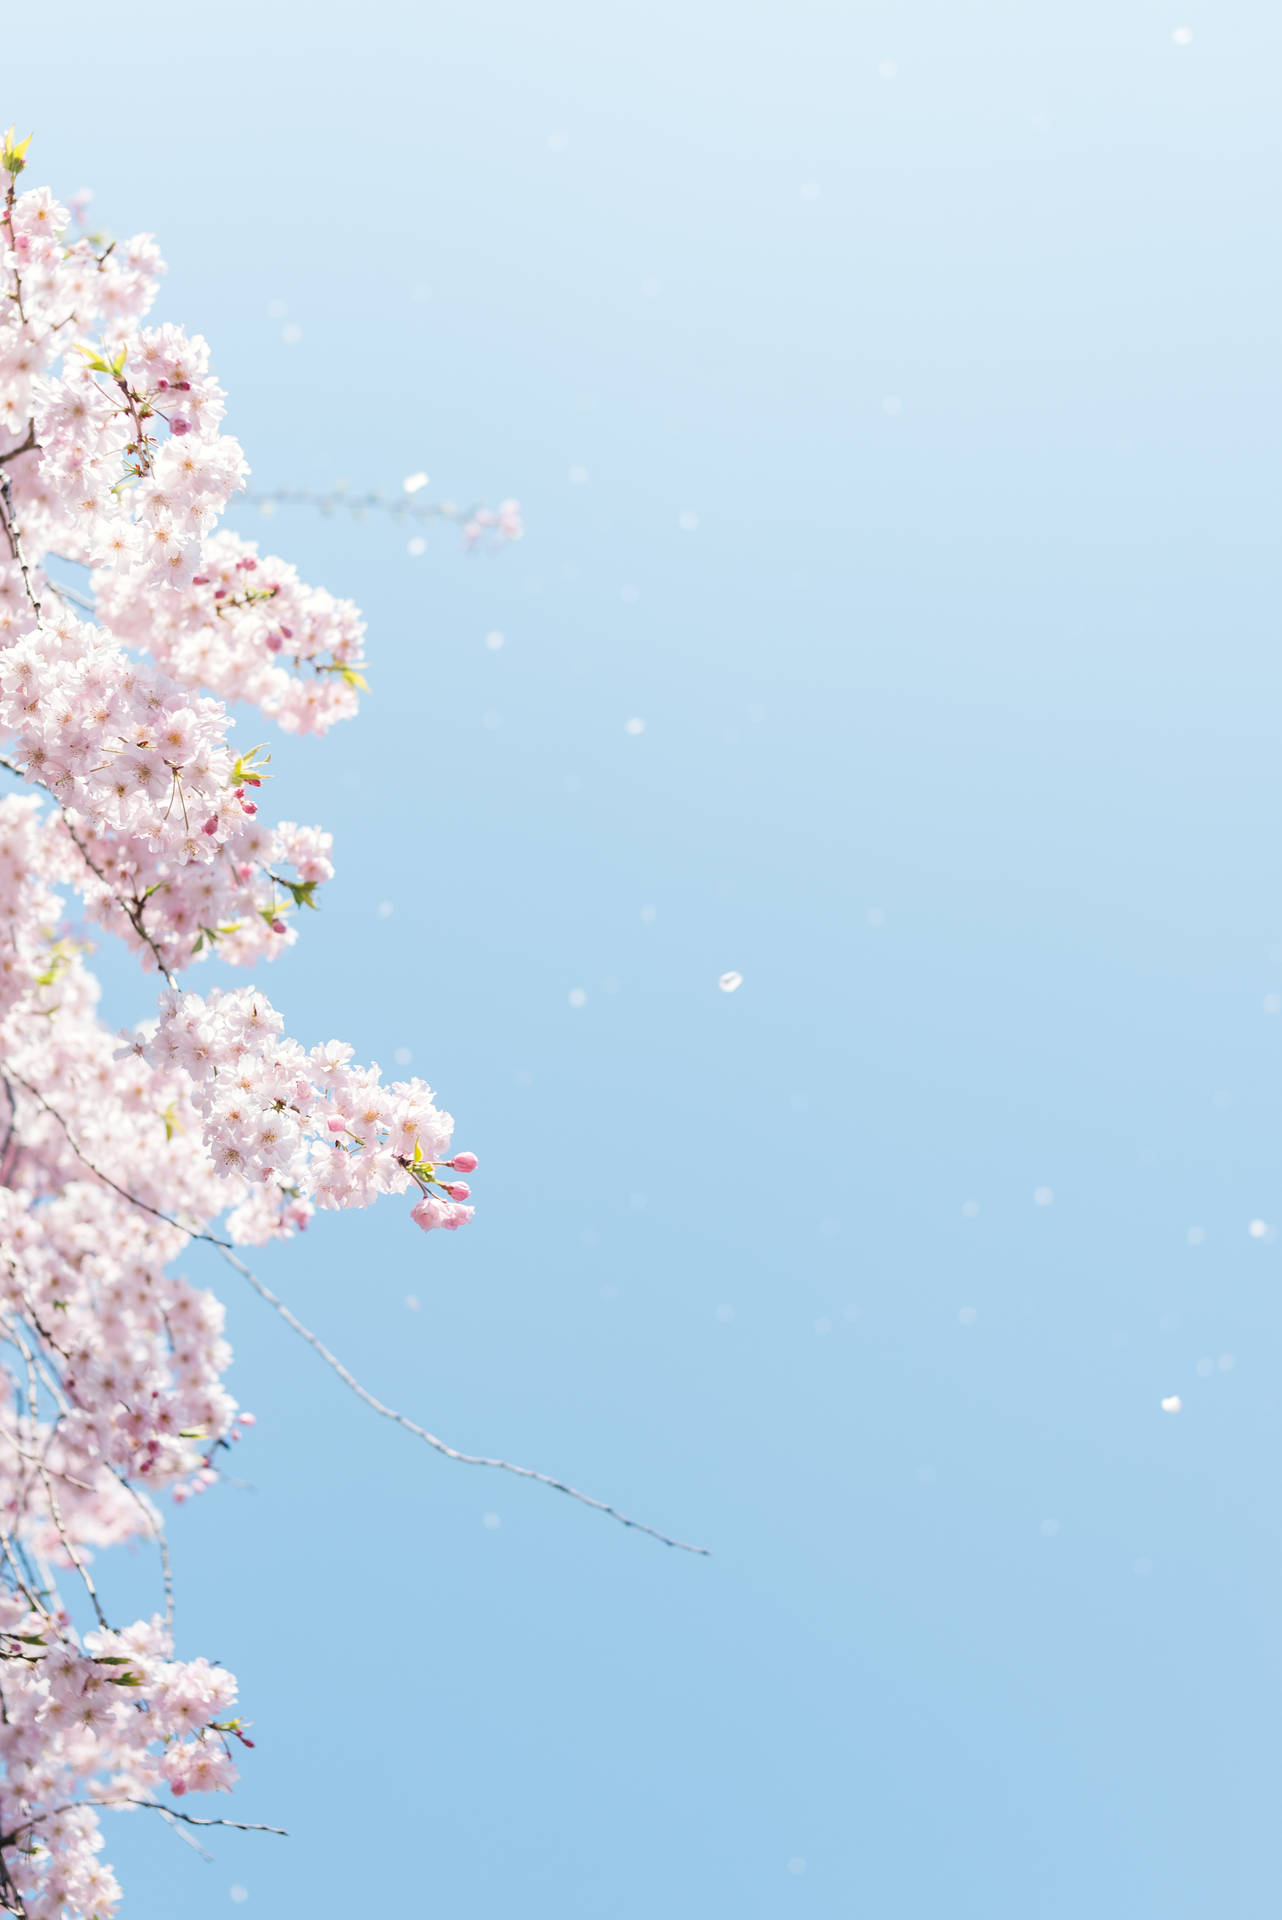 A Single Cherry Blossom Tree Standing Tall And Majestic. Wallpaper